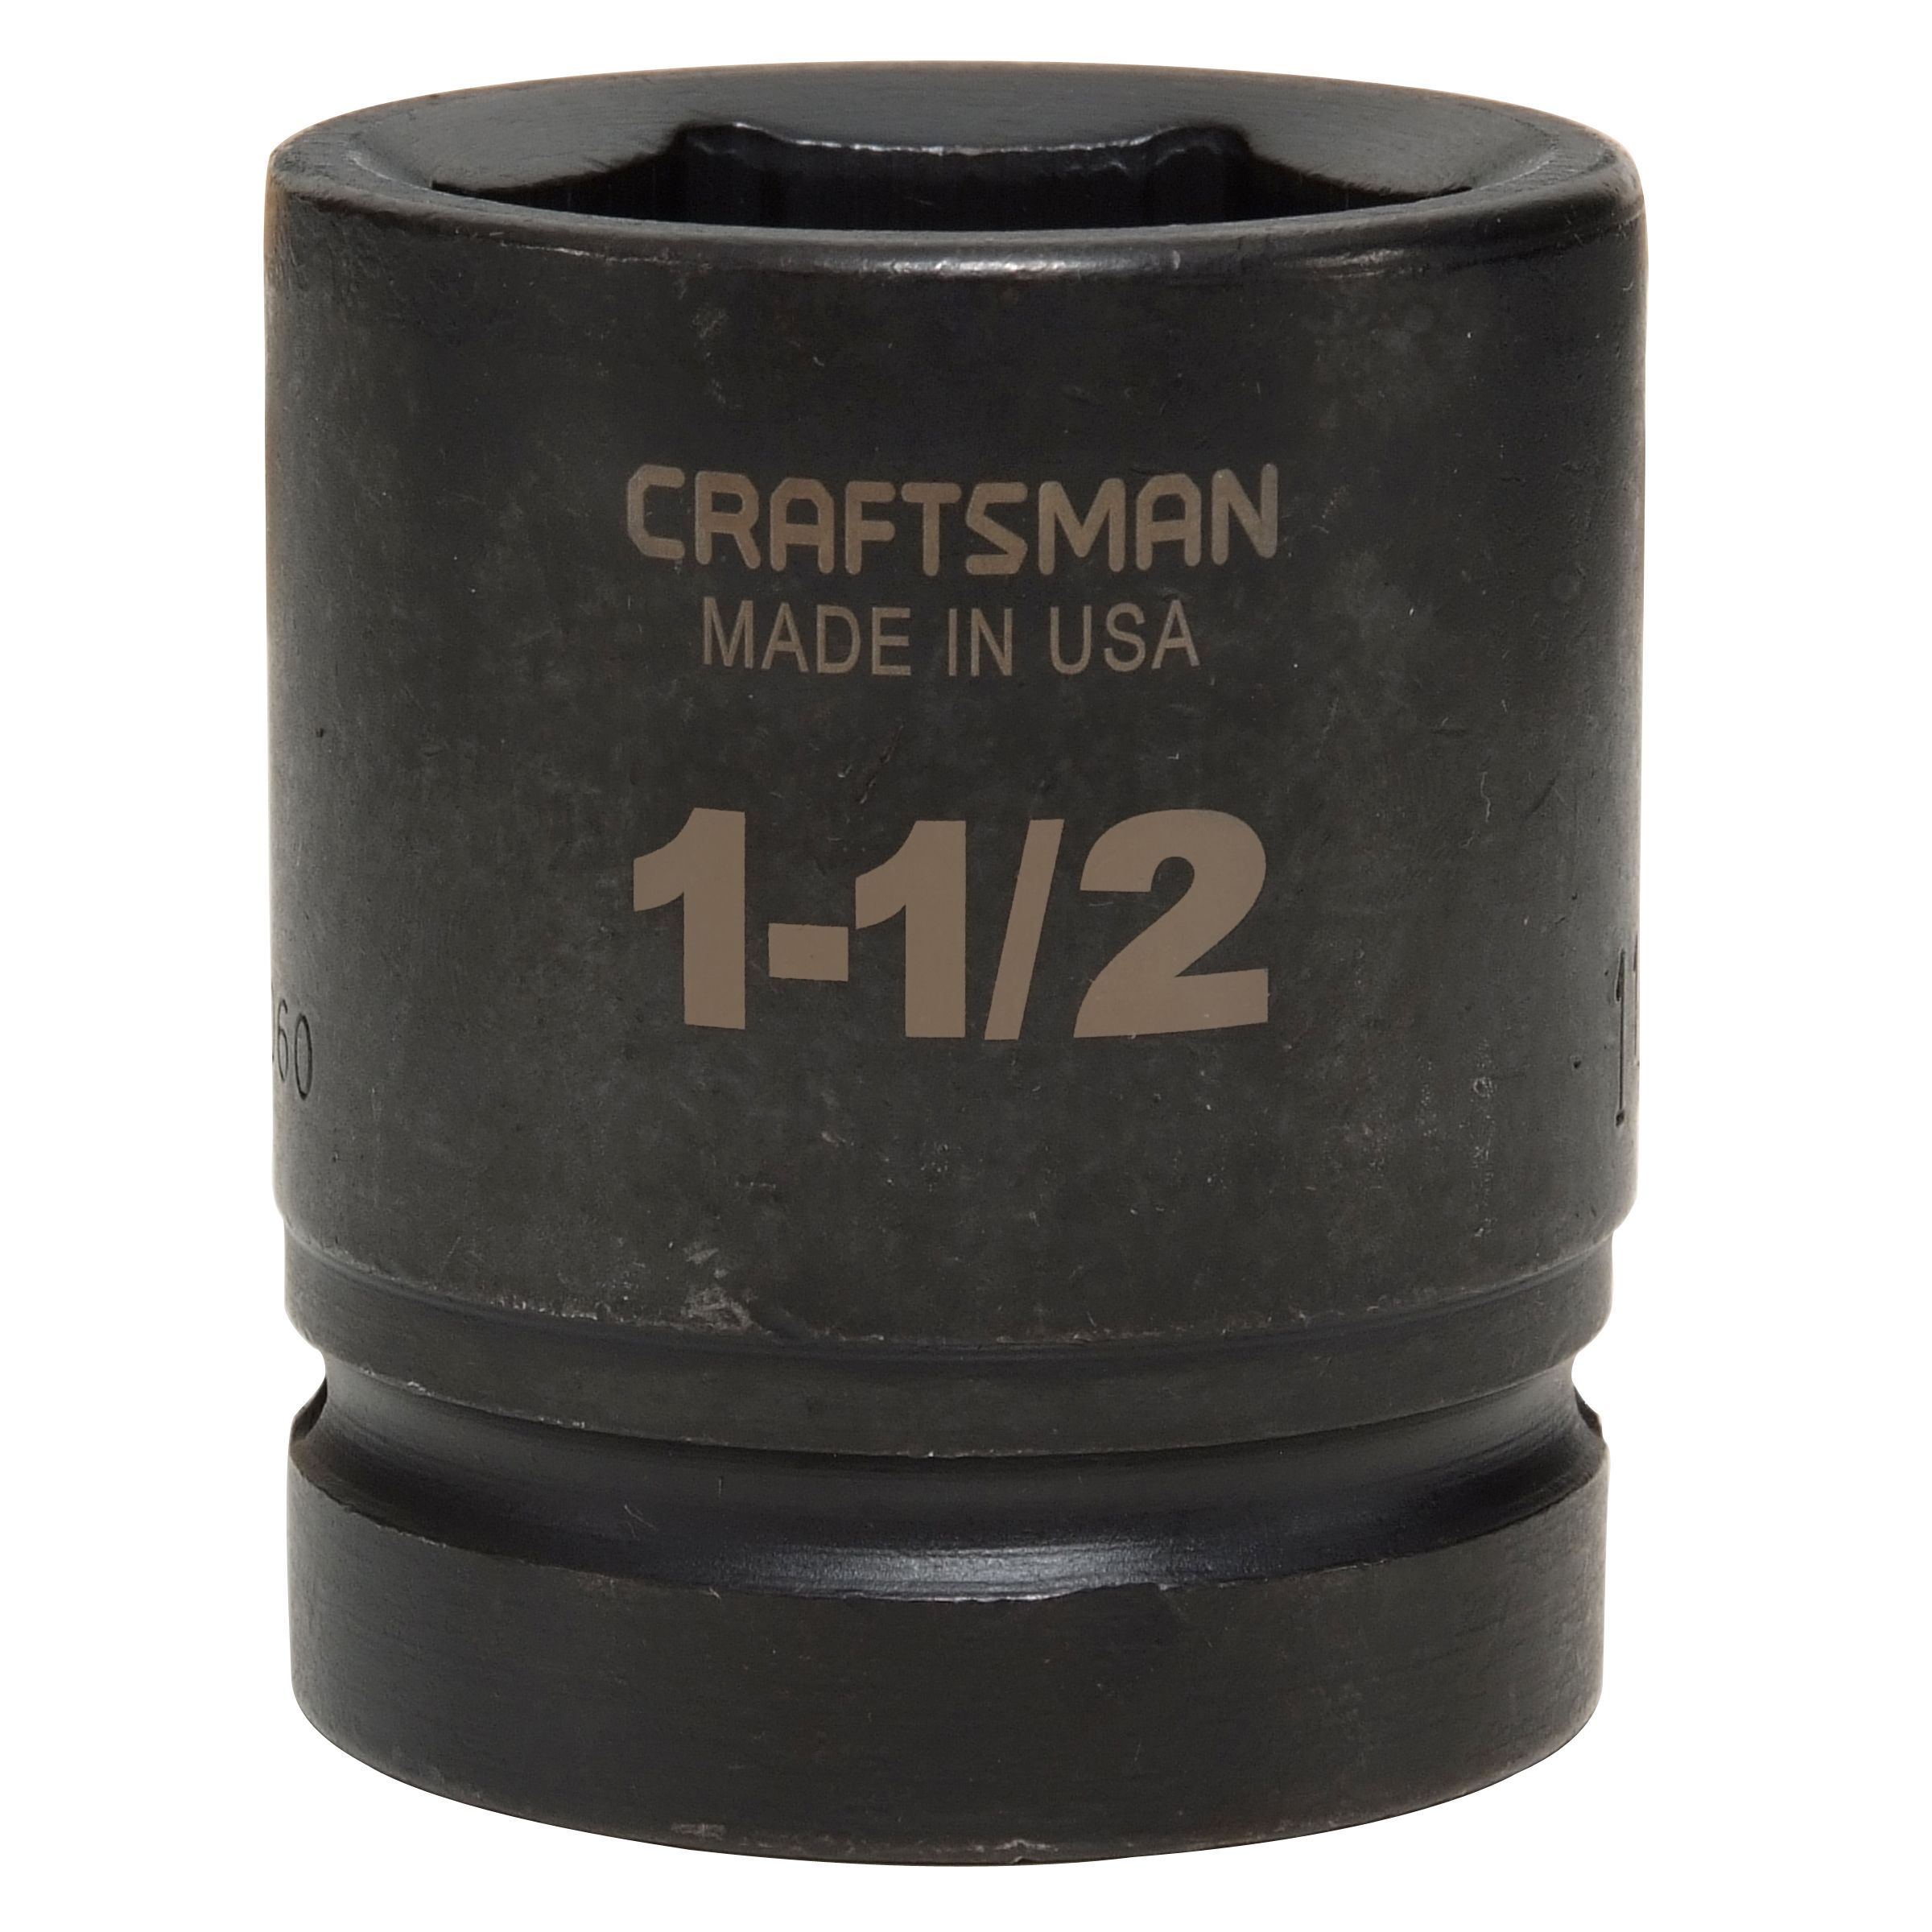 Craftsman Professional Use 1-1/2 in. Easy-To-Read Impact Socket, 6 pt. Standard 1 in. Drive